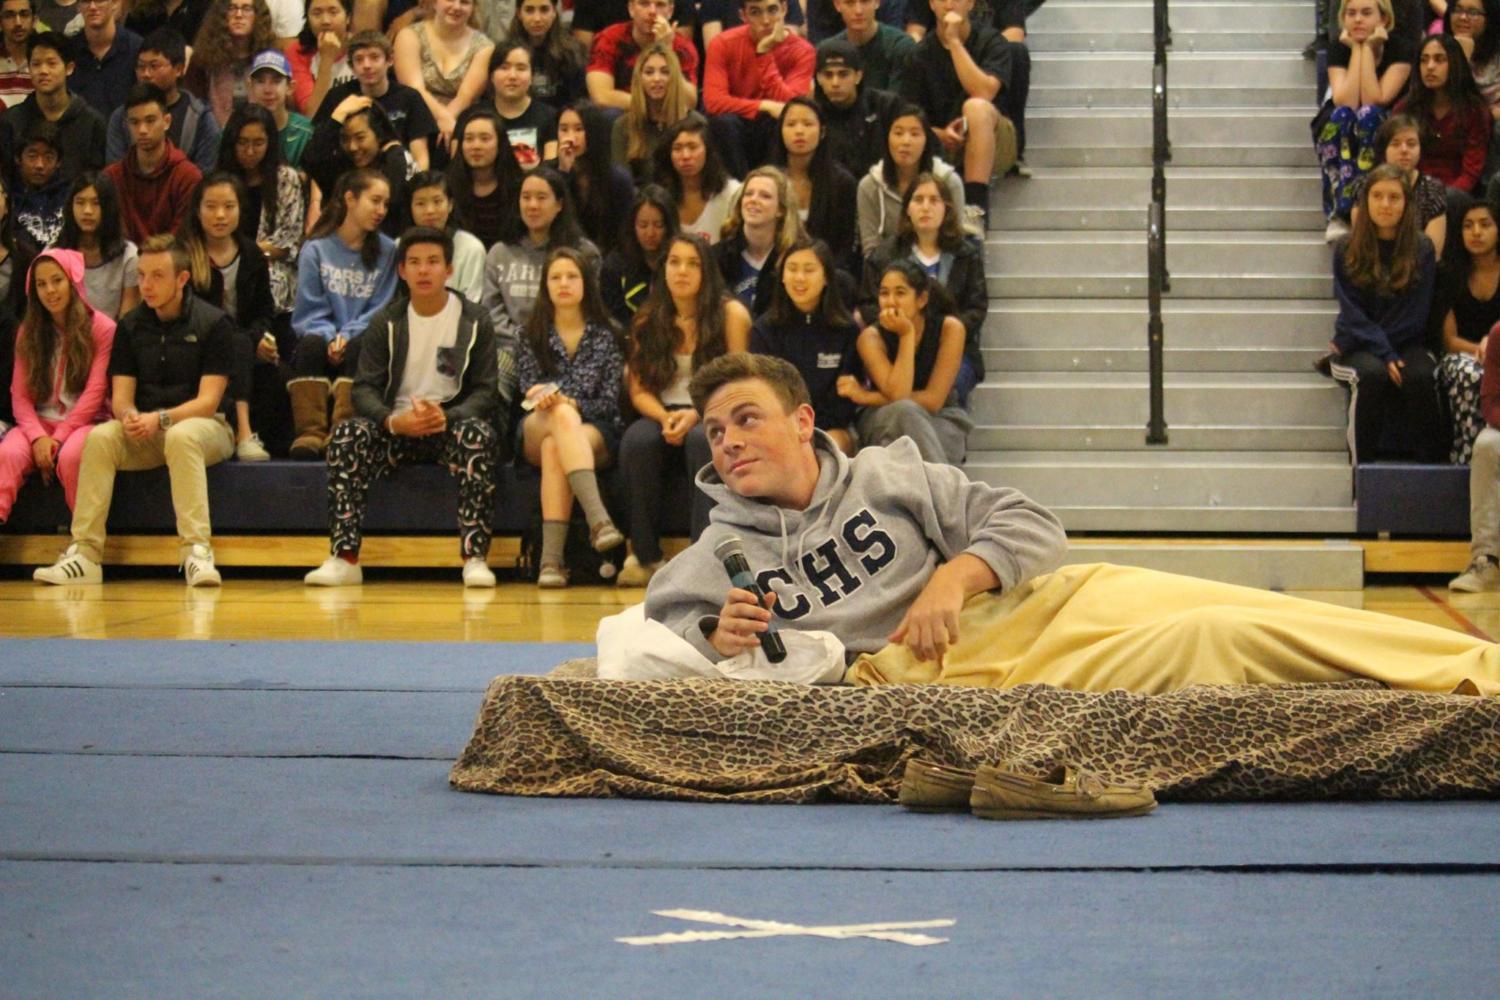 The 2016 Celebration Assembly included skits influenced by common bedtime stories. Class of 2016 graduate, Timmy Miller, started off the assembly on a pretend bed.